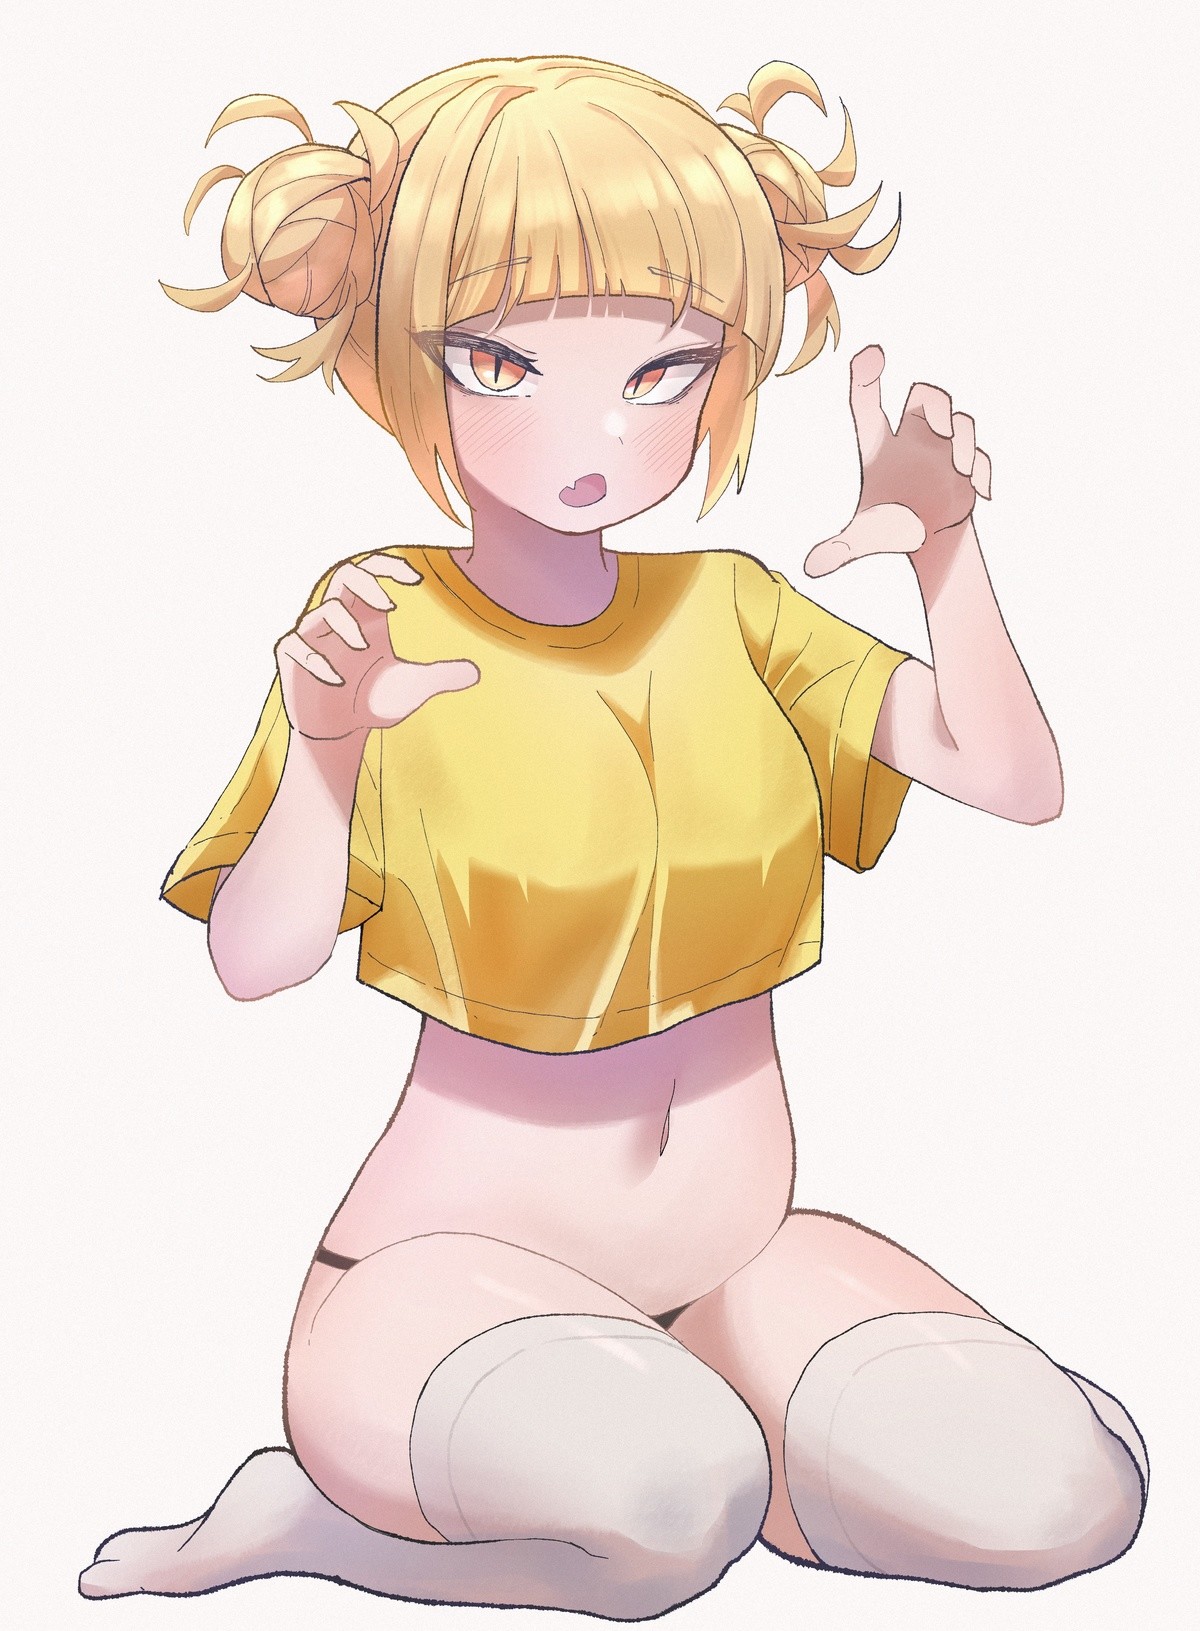 Daily Toga - 914: Crop Top. join list: DailyToga (477 subs)Mention History Source: .. Volodia